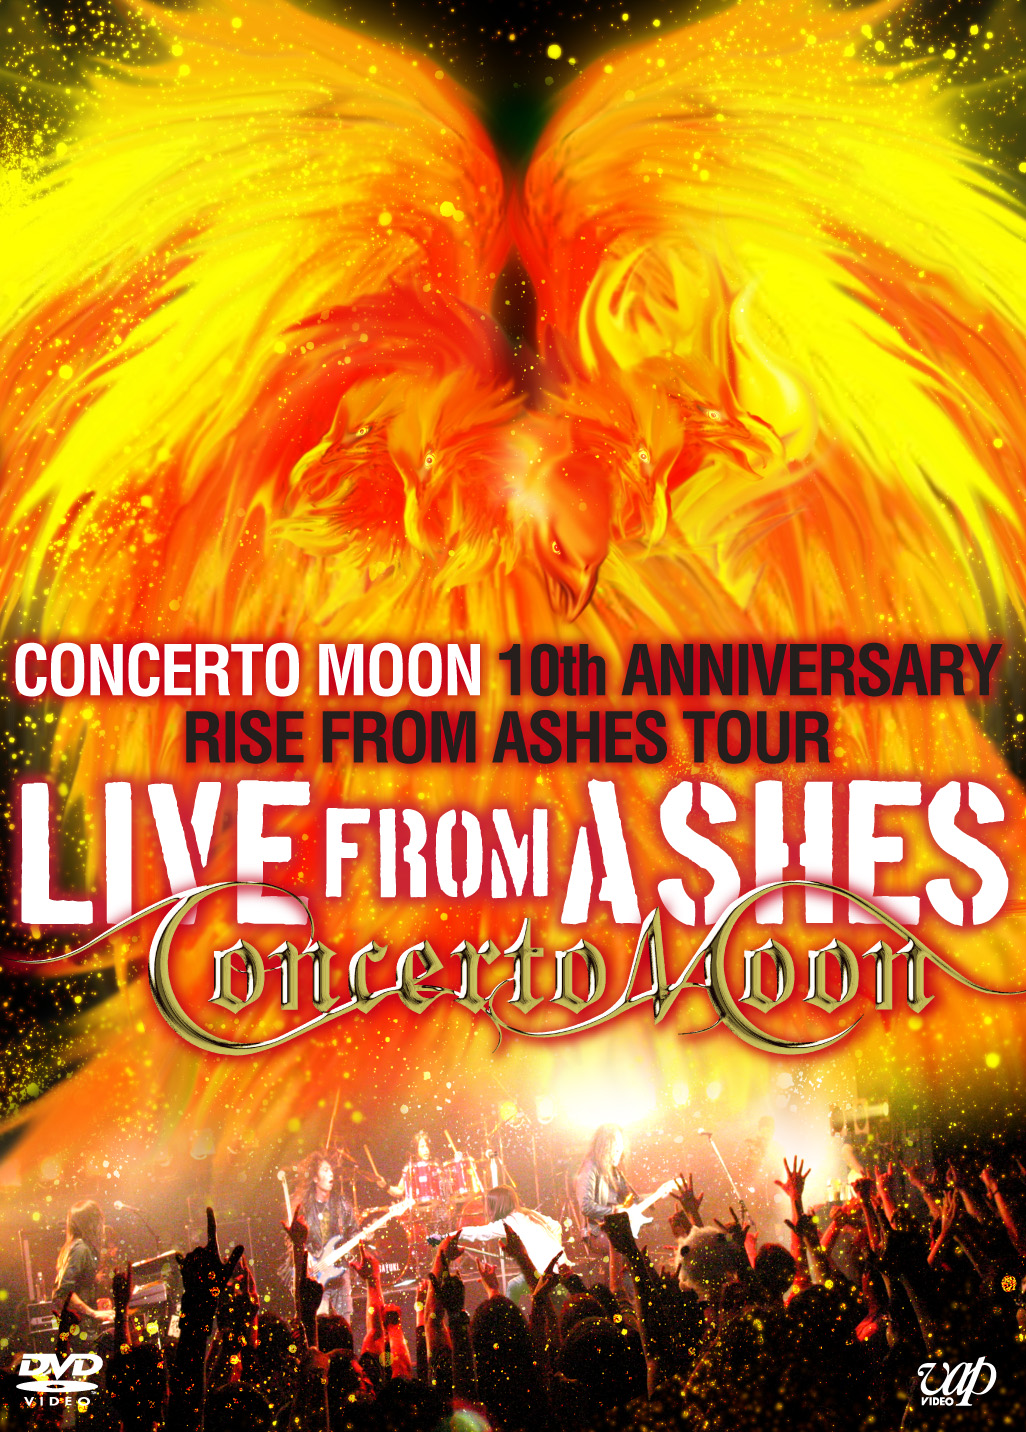 CONCERTO MOON - Live from Ashes - Concerto Moon 10th Anniversary Rise from Ashes Tour cover 